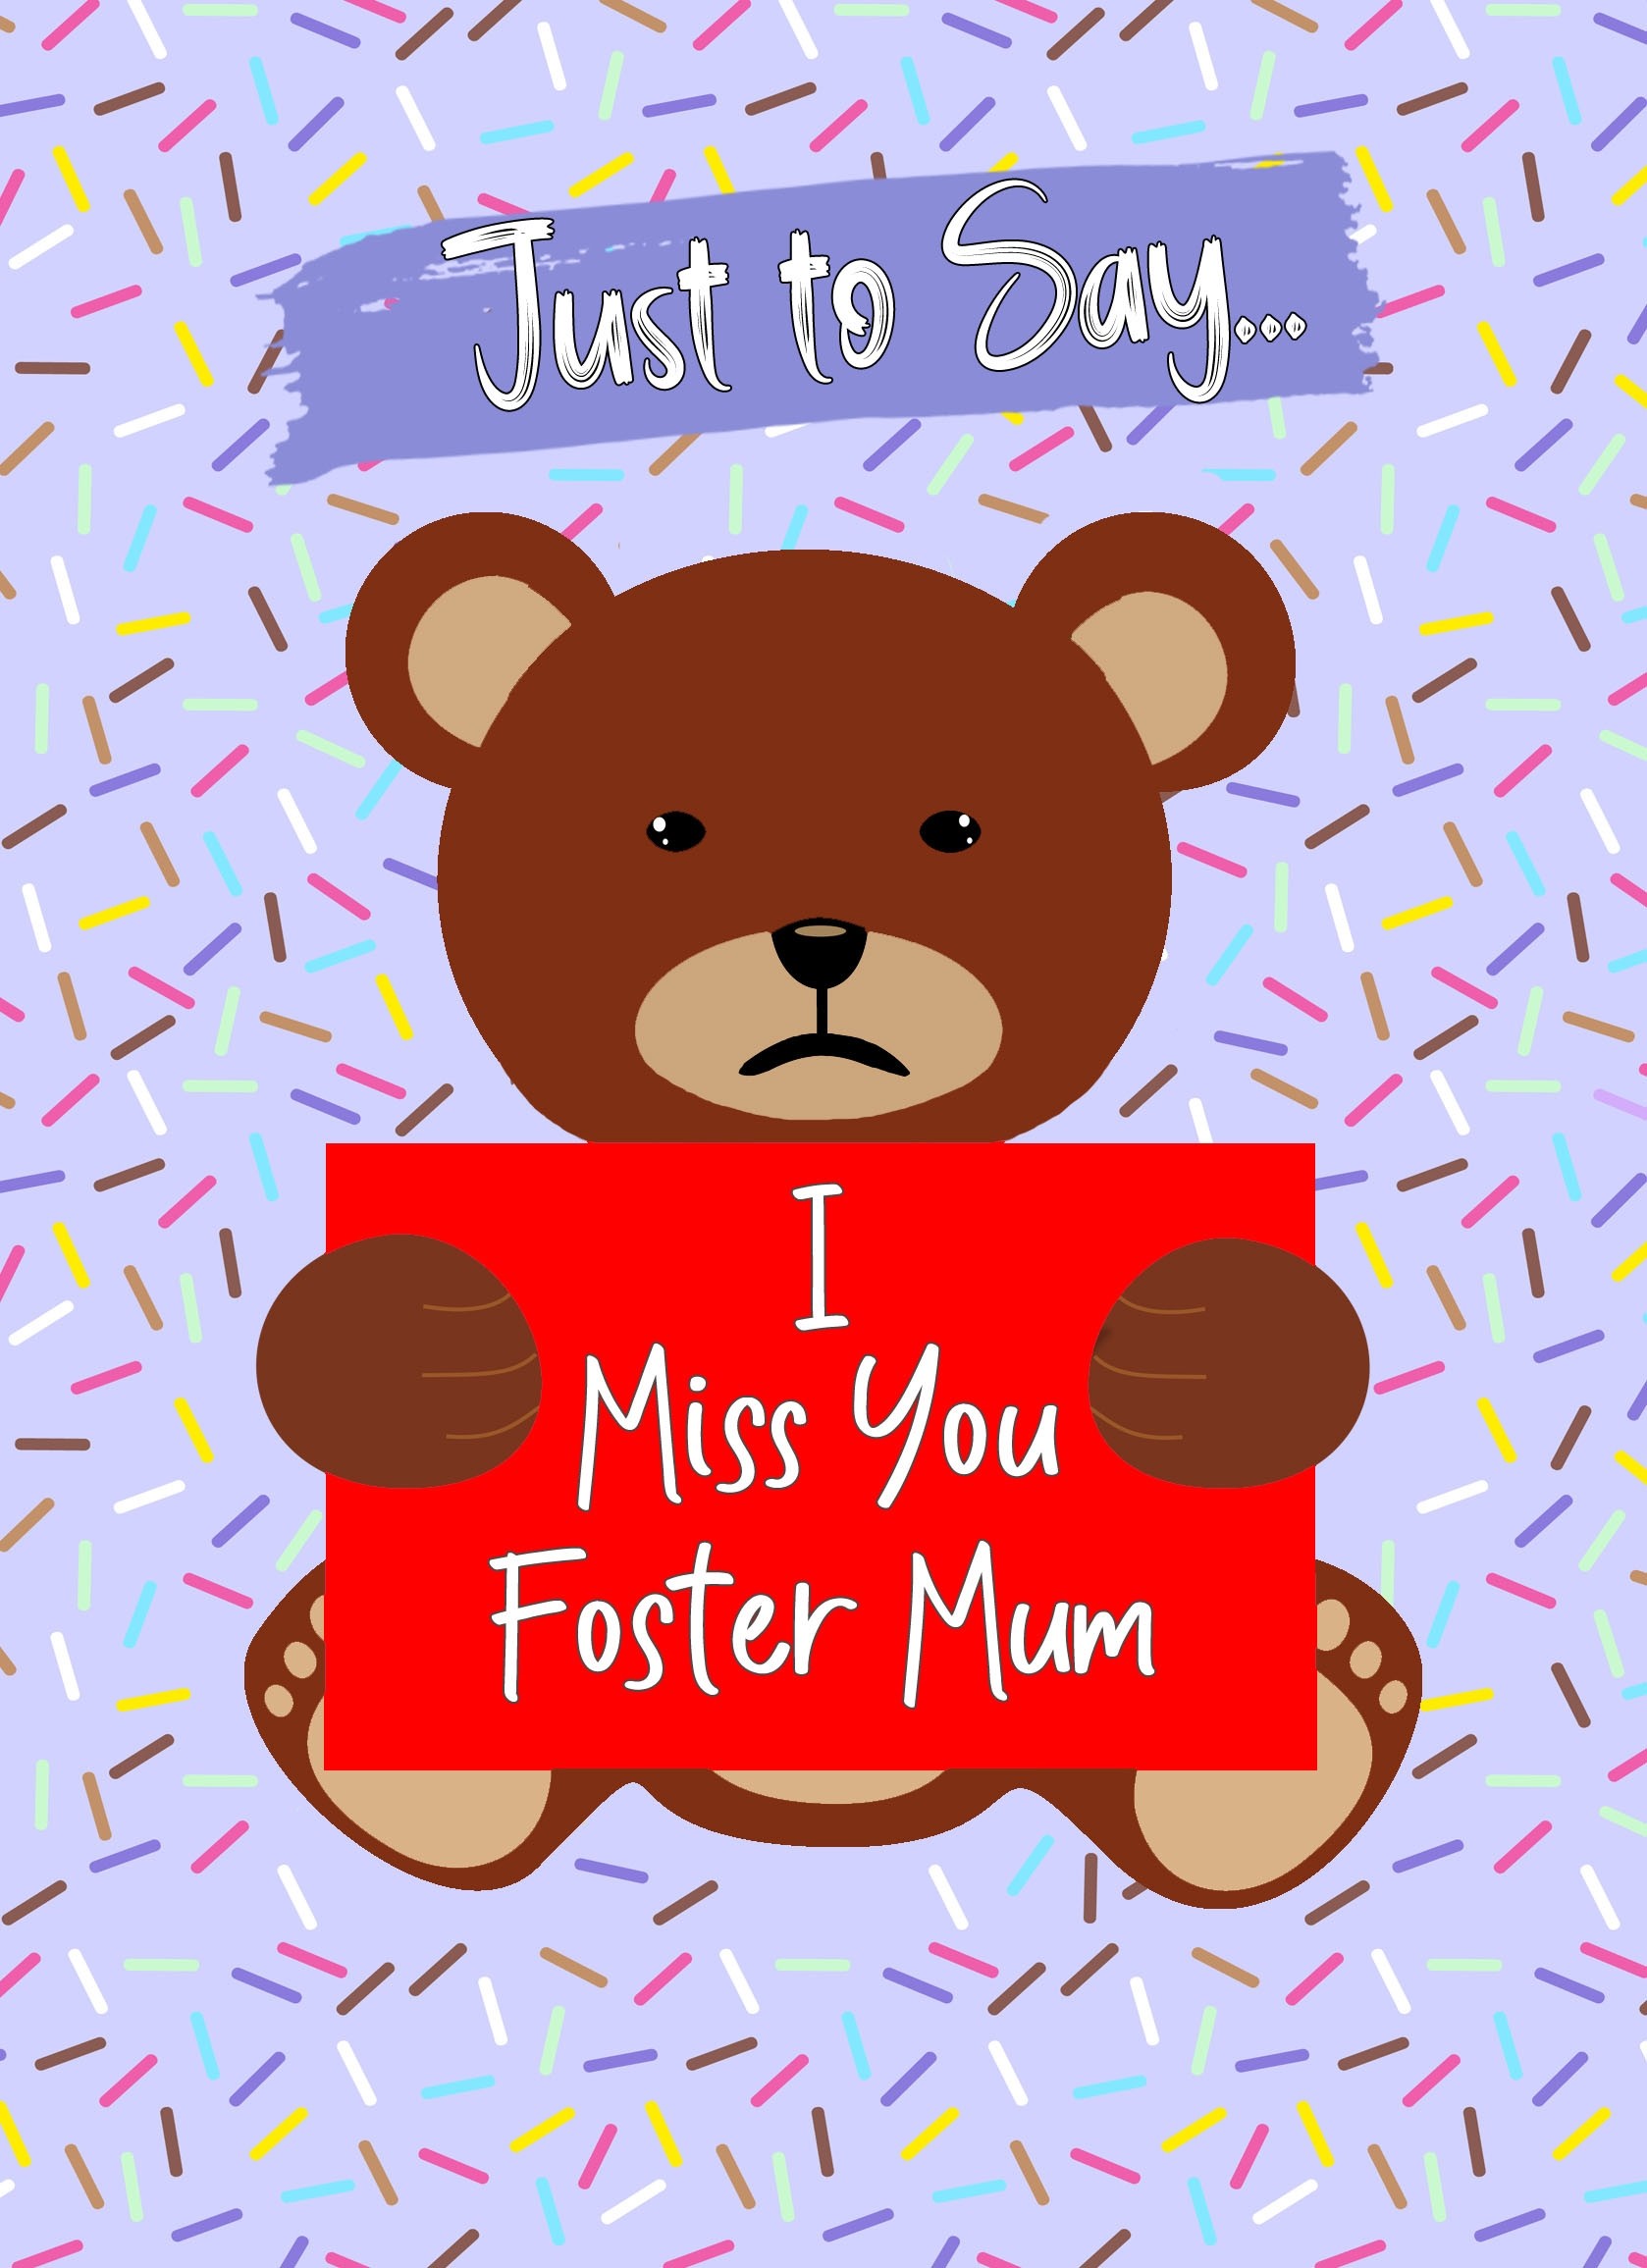 Missing You Card For Foster Mum (Bear)